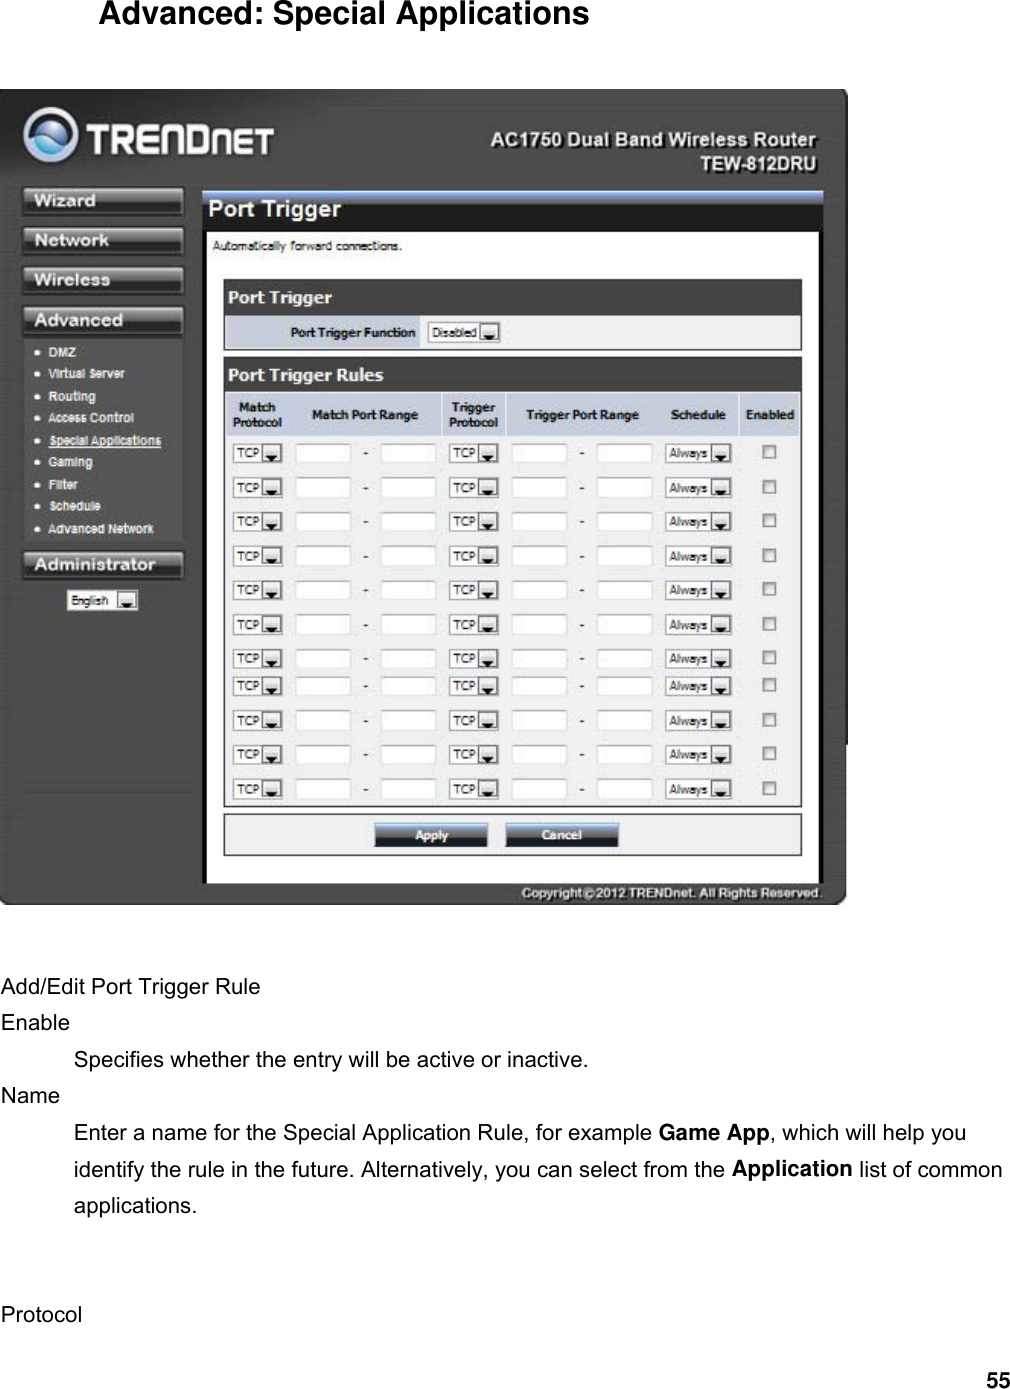 55 Advanced: Special Applications   Add/Edit Port Trigger Rule   Enable  Specifies whether the entry will be active or inactive.   Name  Enter a name for the Special Application Rule, for example Game App, which will help you identify the rule in the future. Alternatively, you can select from the Application list of common applications.    Protocol  